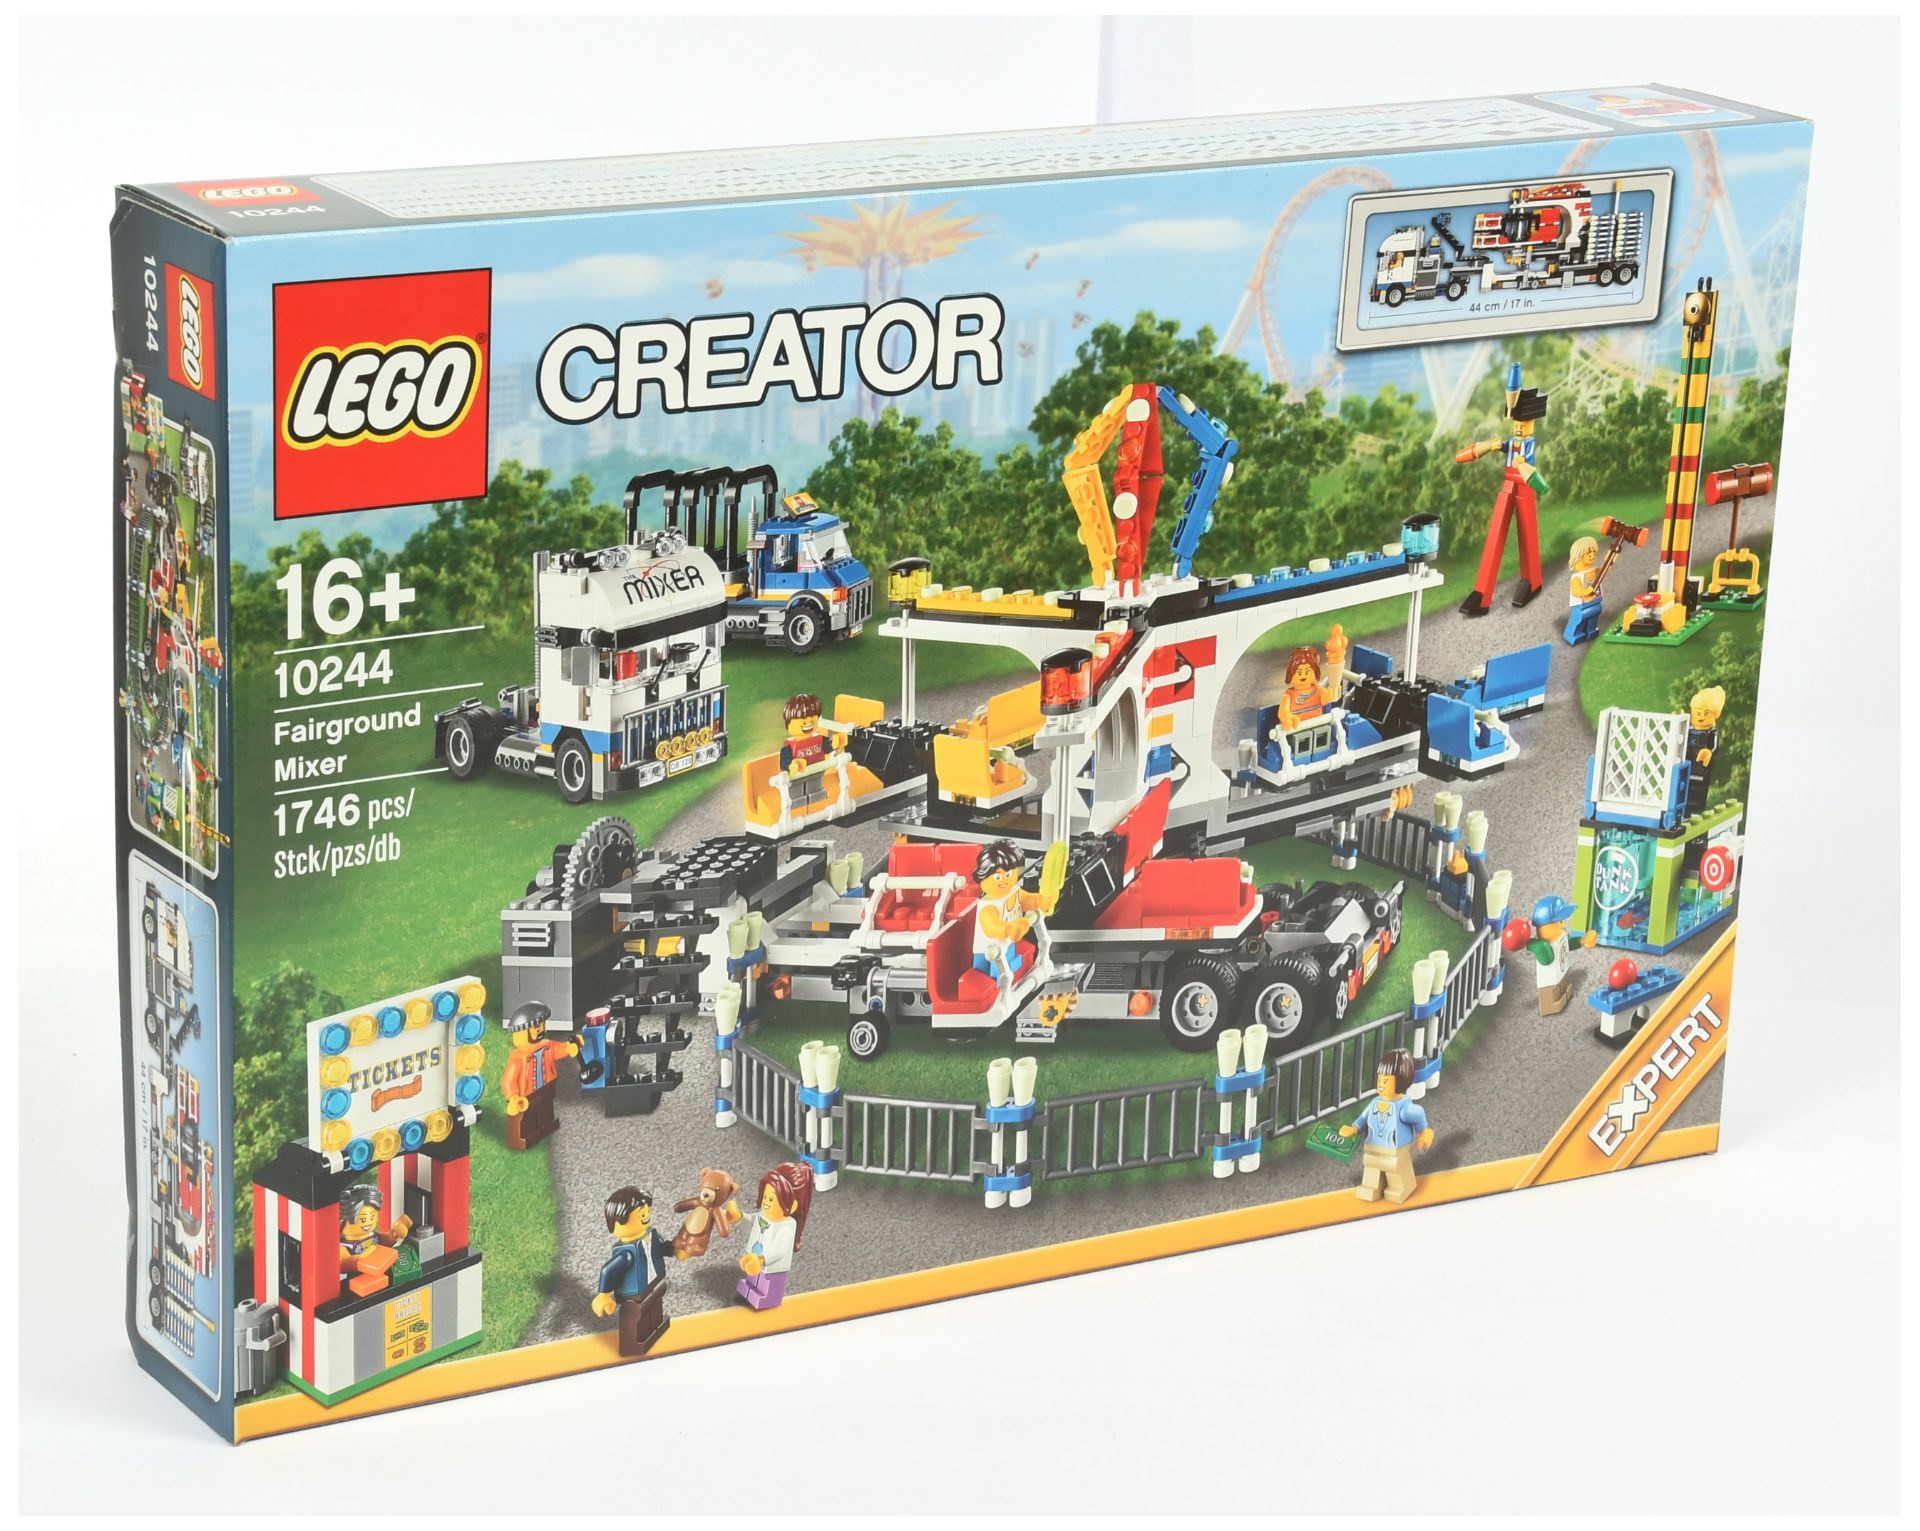 Lego Creator10244 Fairground Mixer, within Near Mint sealed packaging.